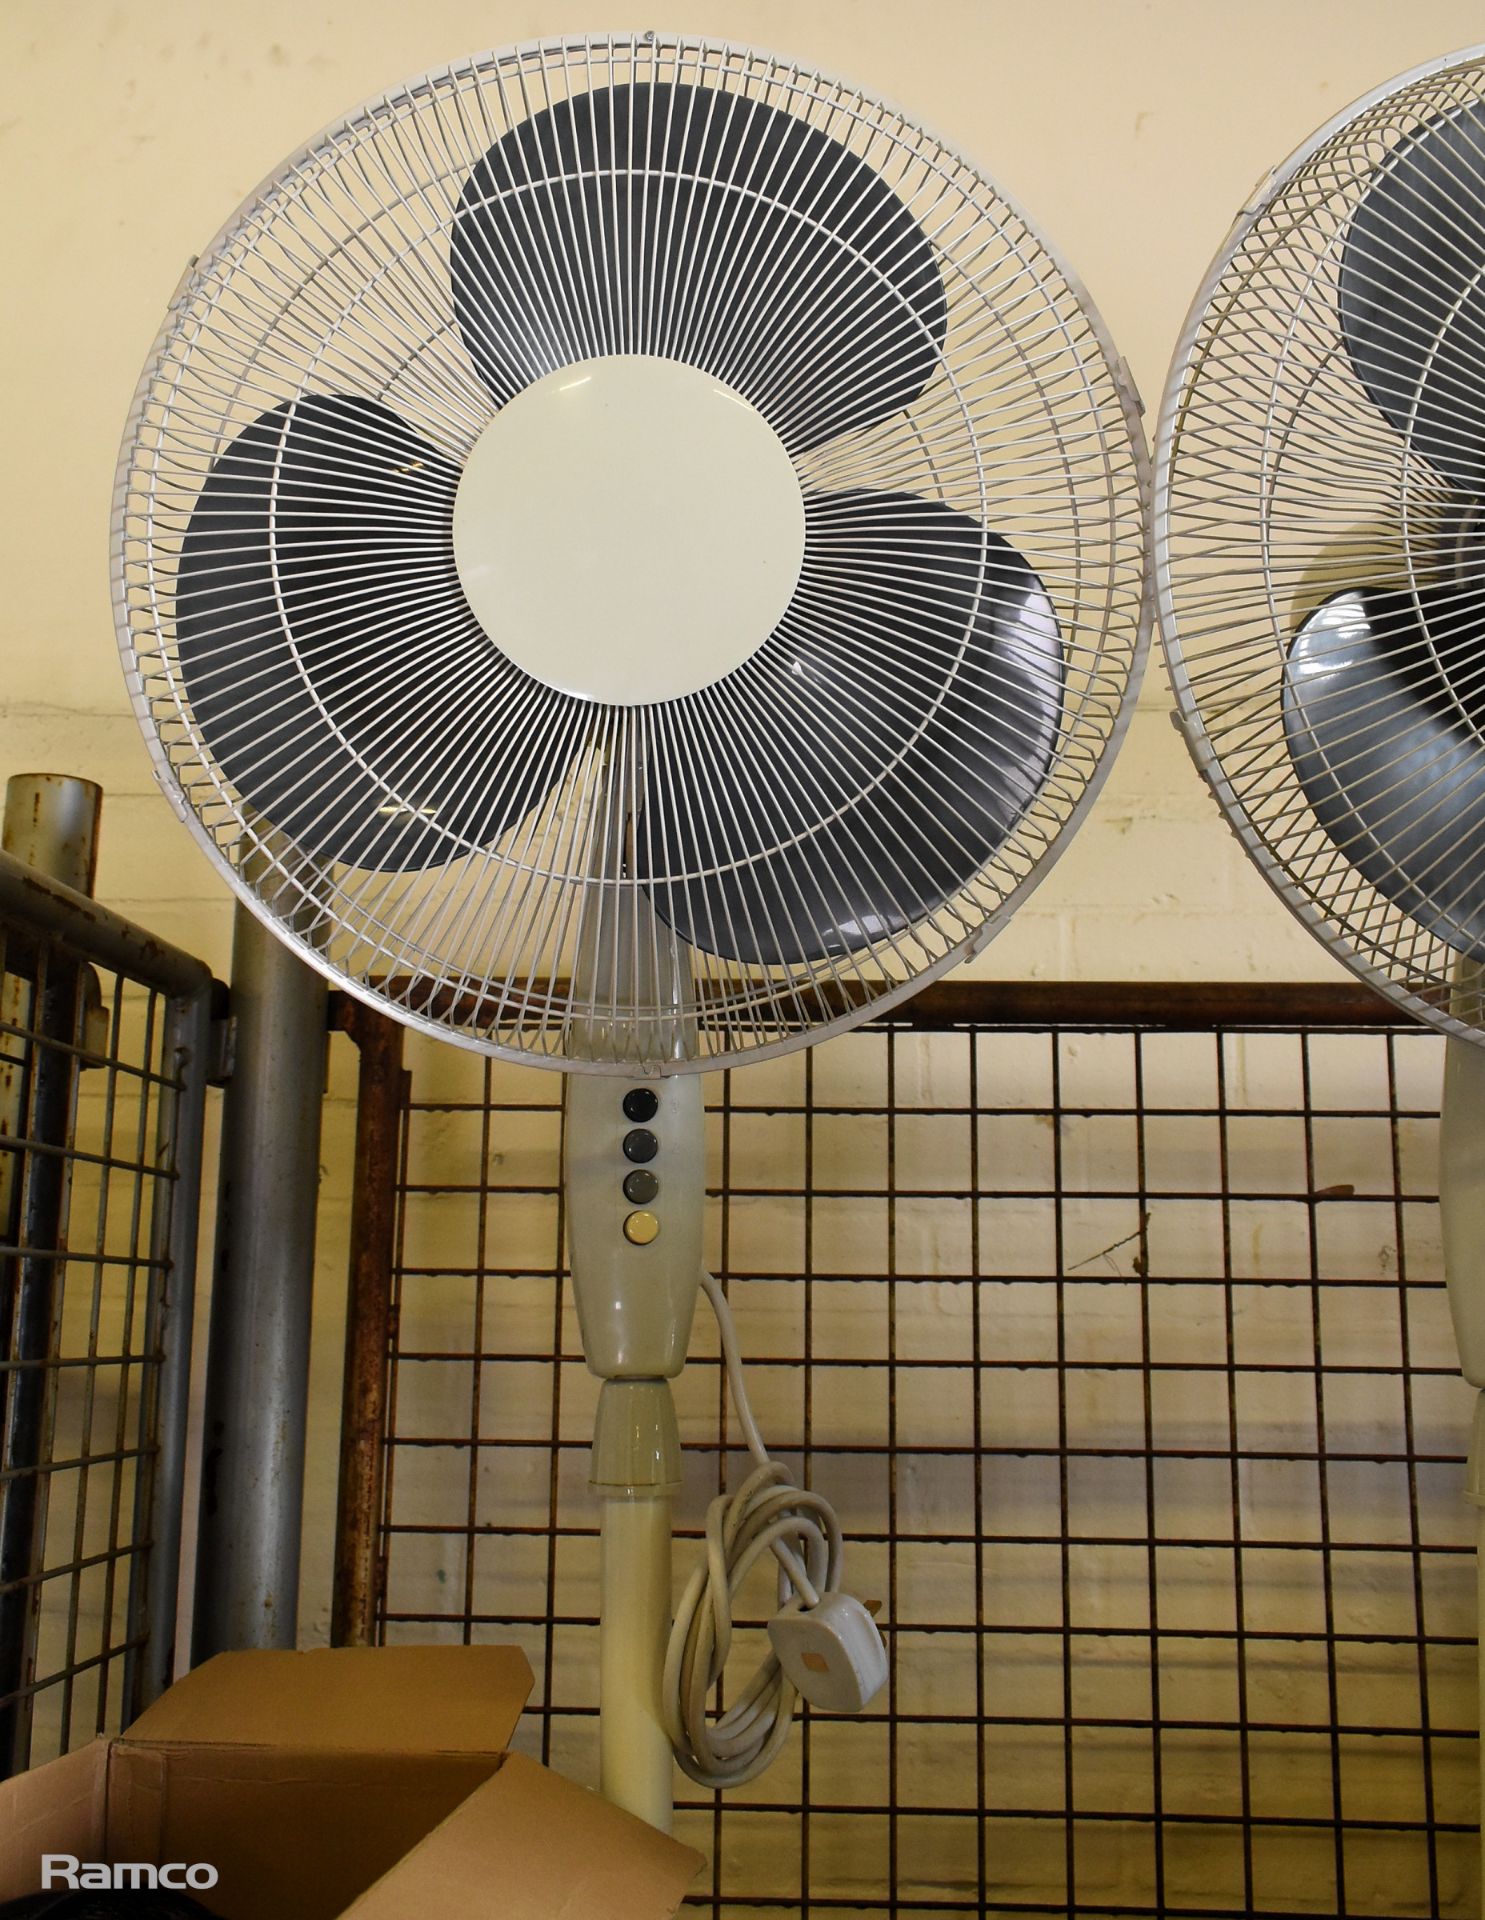 Electrical goods - 8x oscillating fans, kettle, steam iron, coffee percolator, extension lead - Image 2 of 9